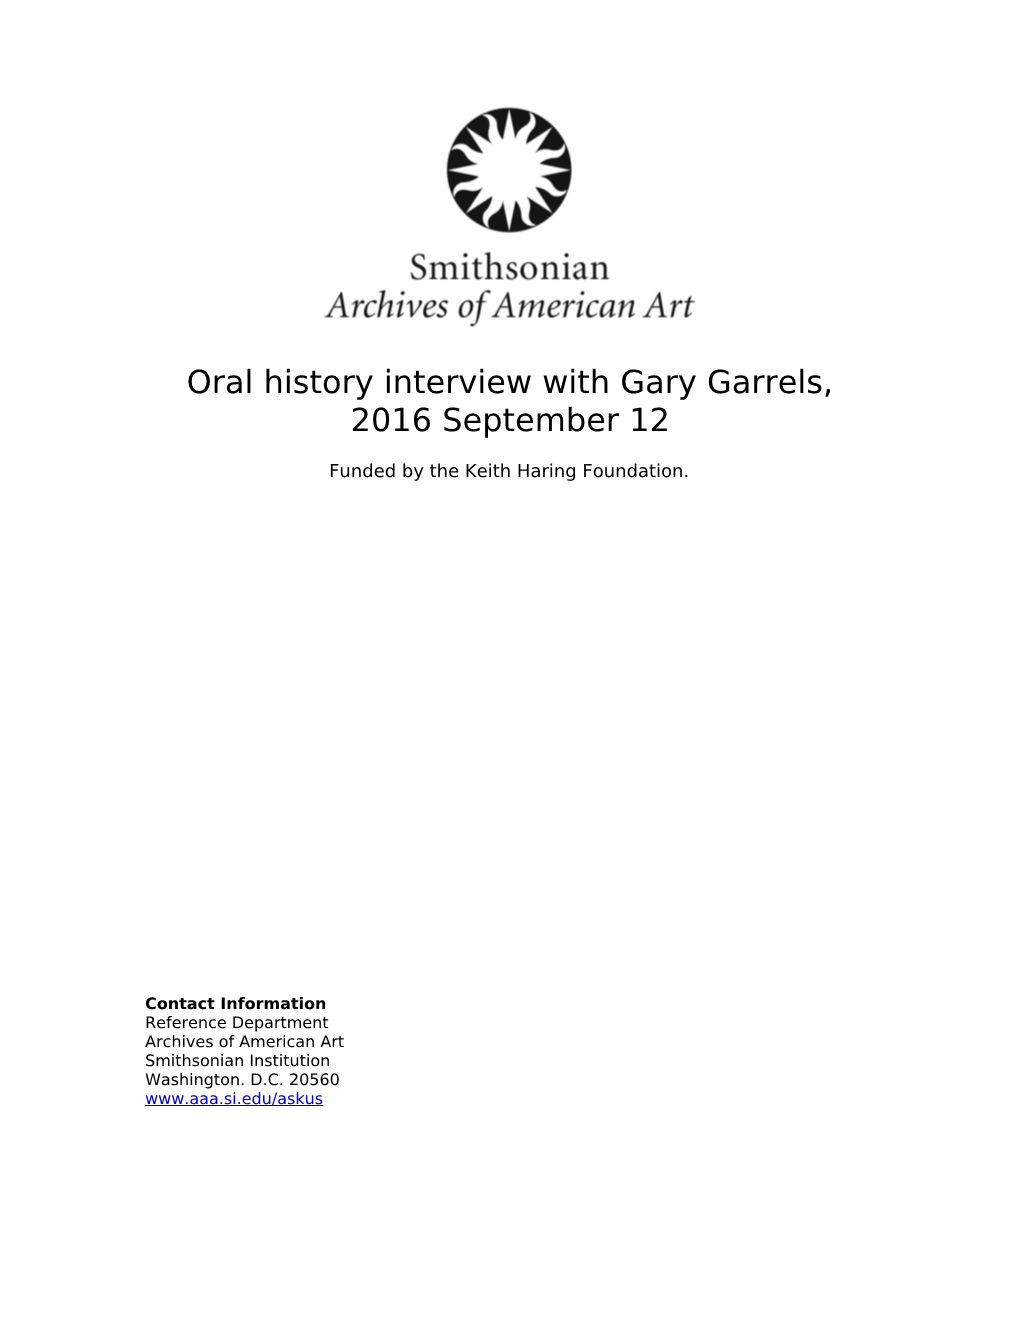 Oral History Interview with Gary Garrels, 2016 September 12